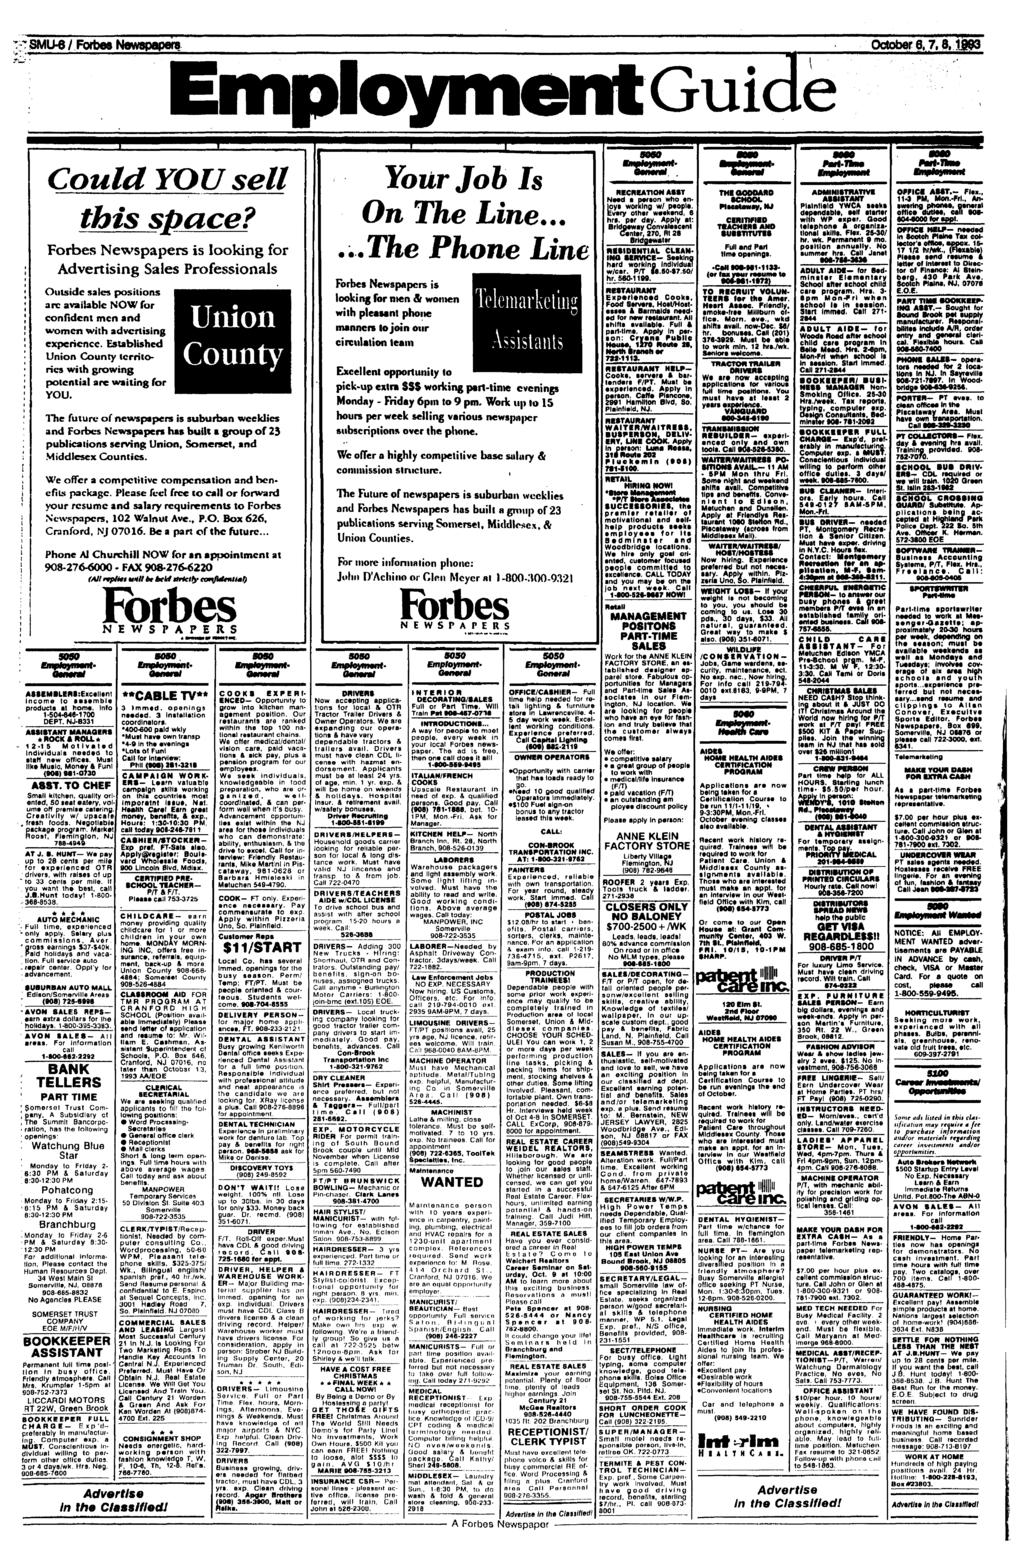 NewspapersEmployment SMU-6 /Forbes October Guide 6,7,8,1993 Could YOU sell this space?